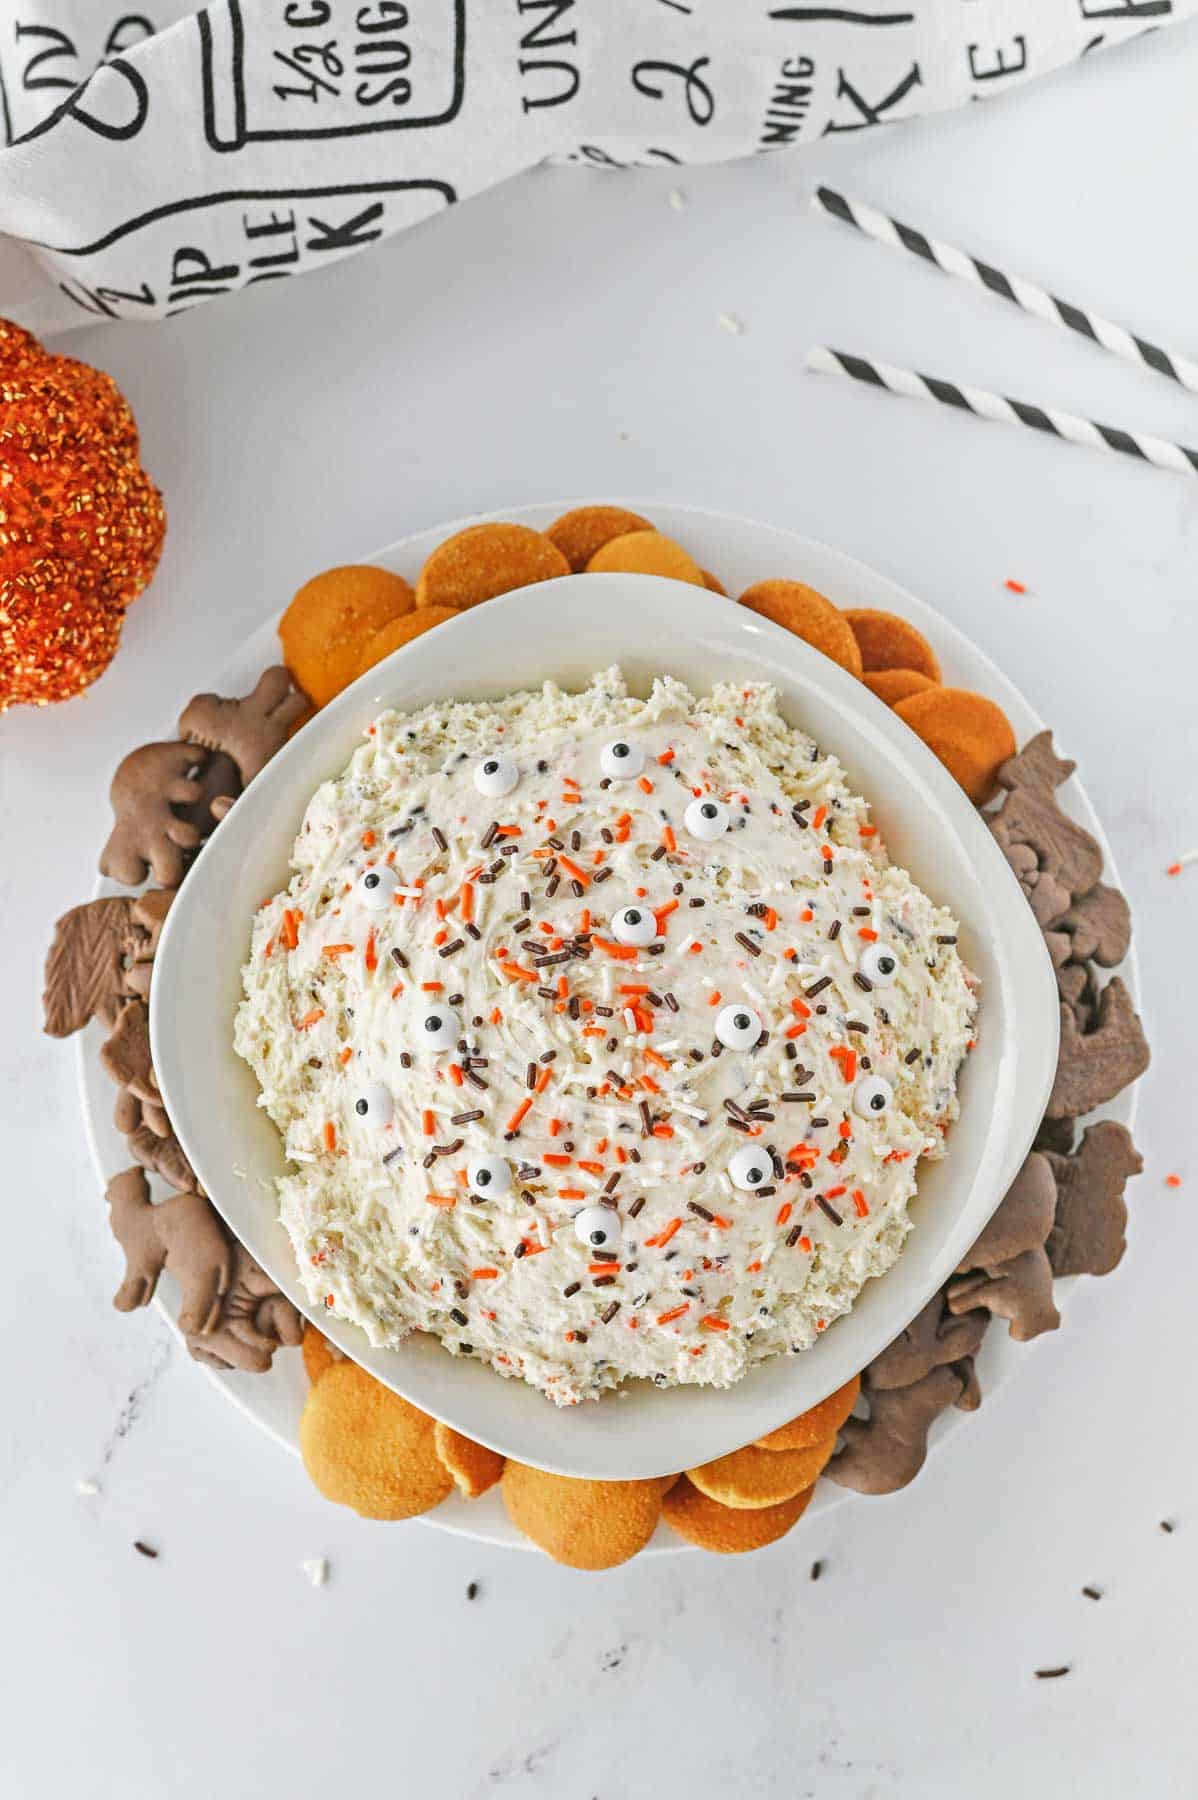 A bowl of dunkaroo dip with sprinkles on top and chocolate crackers and vanilla wafers.